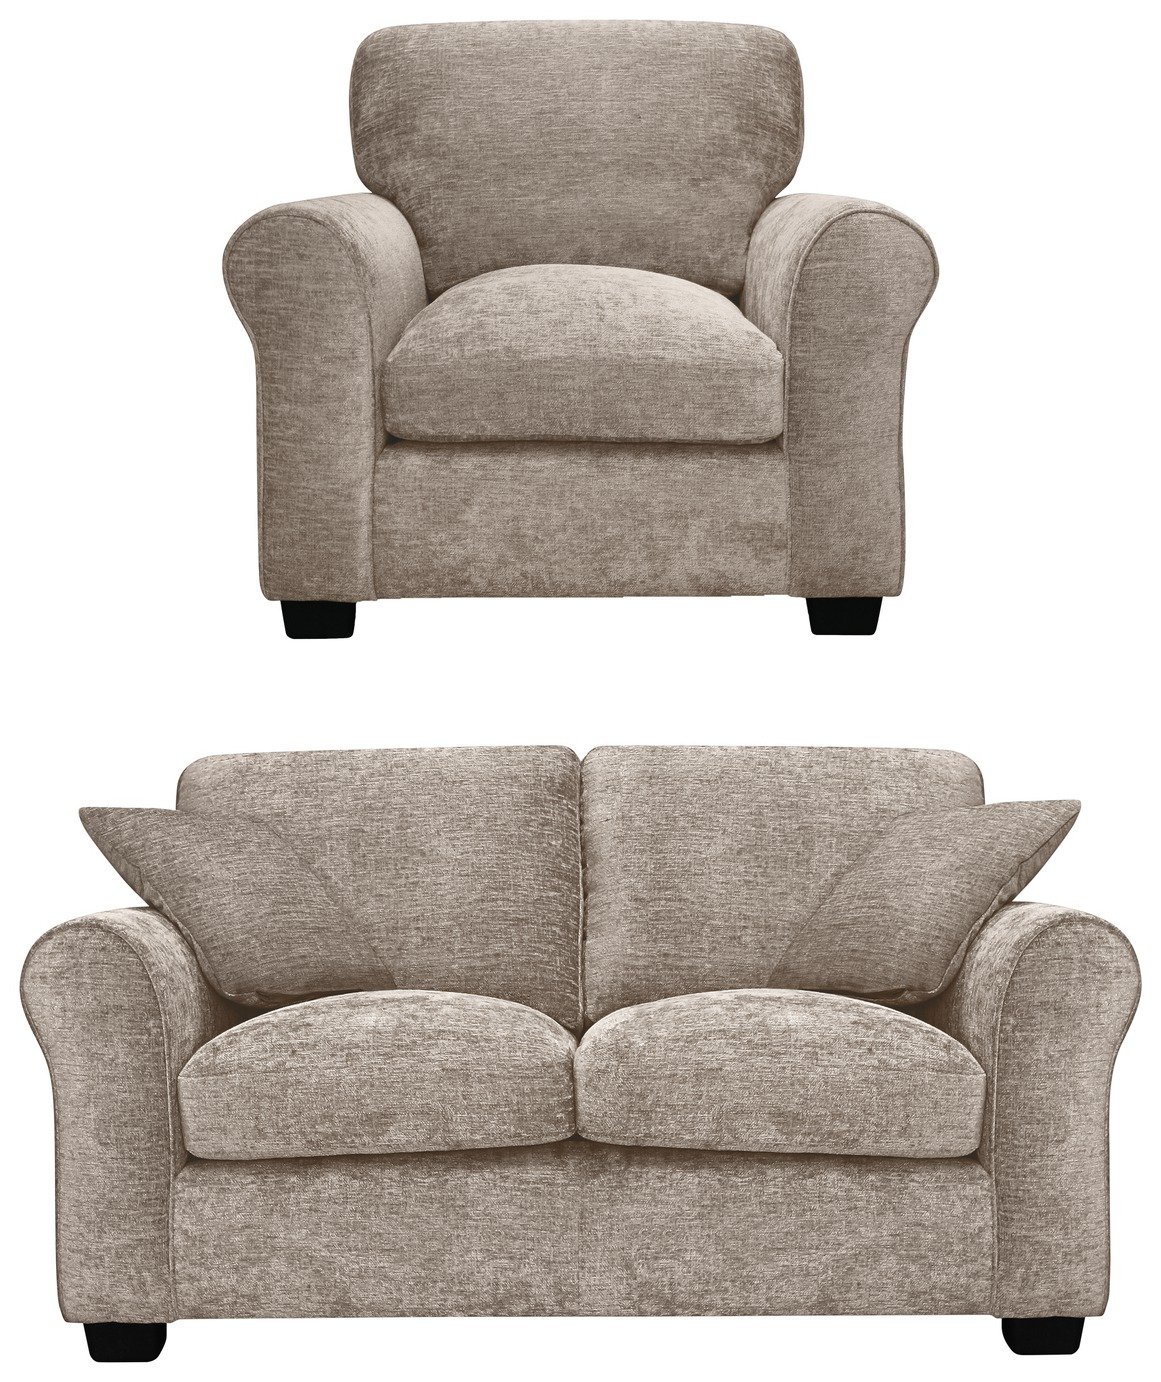 Argos Home Taylor Fabric Chair & 2 Seater Sofa - Mink